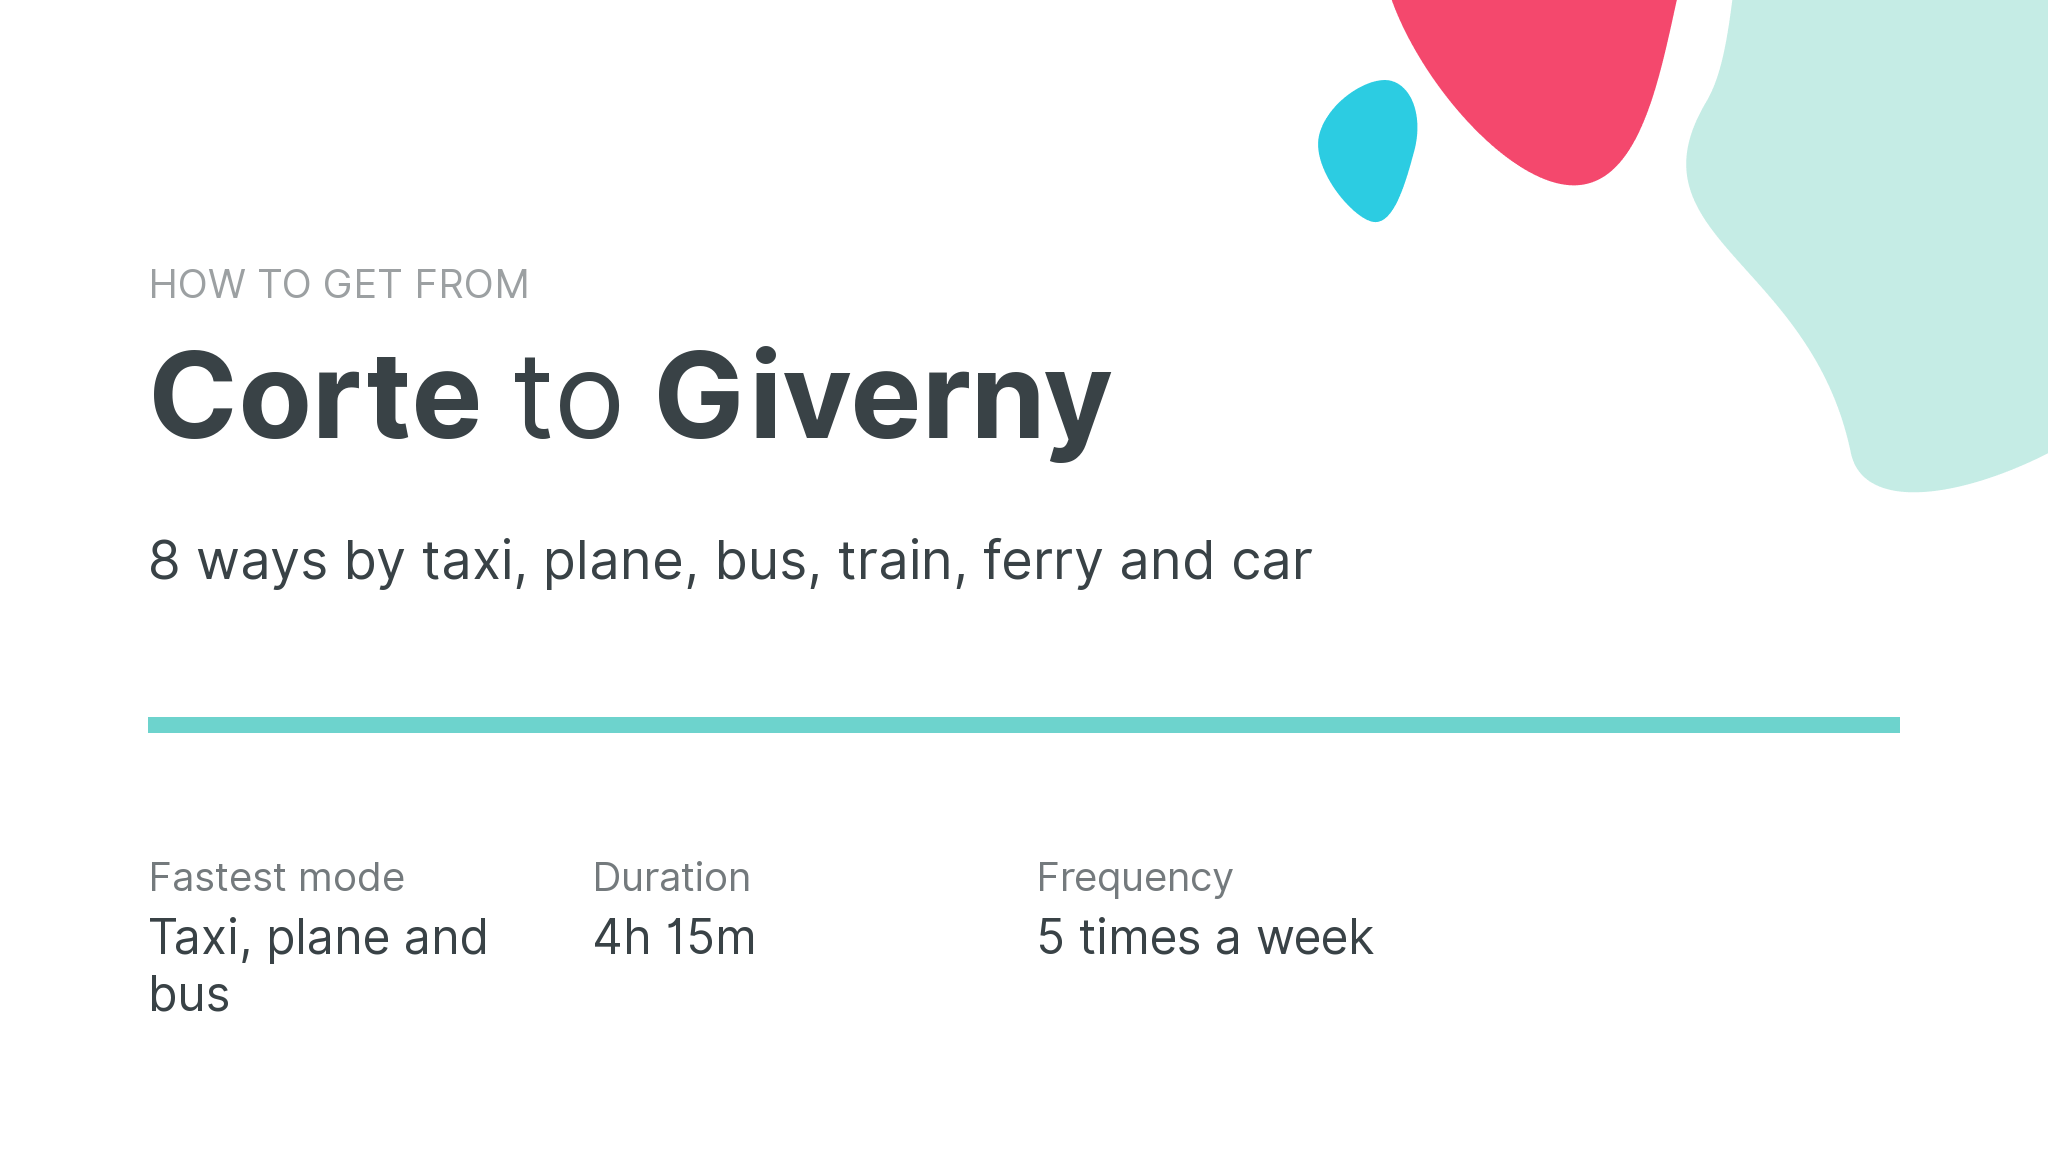 How do I get from Corte to Giverny